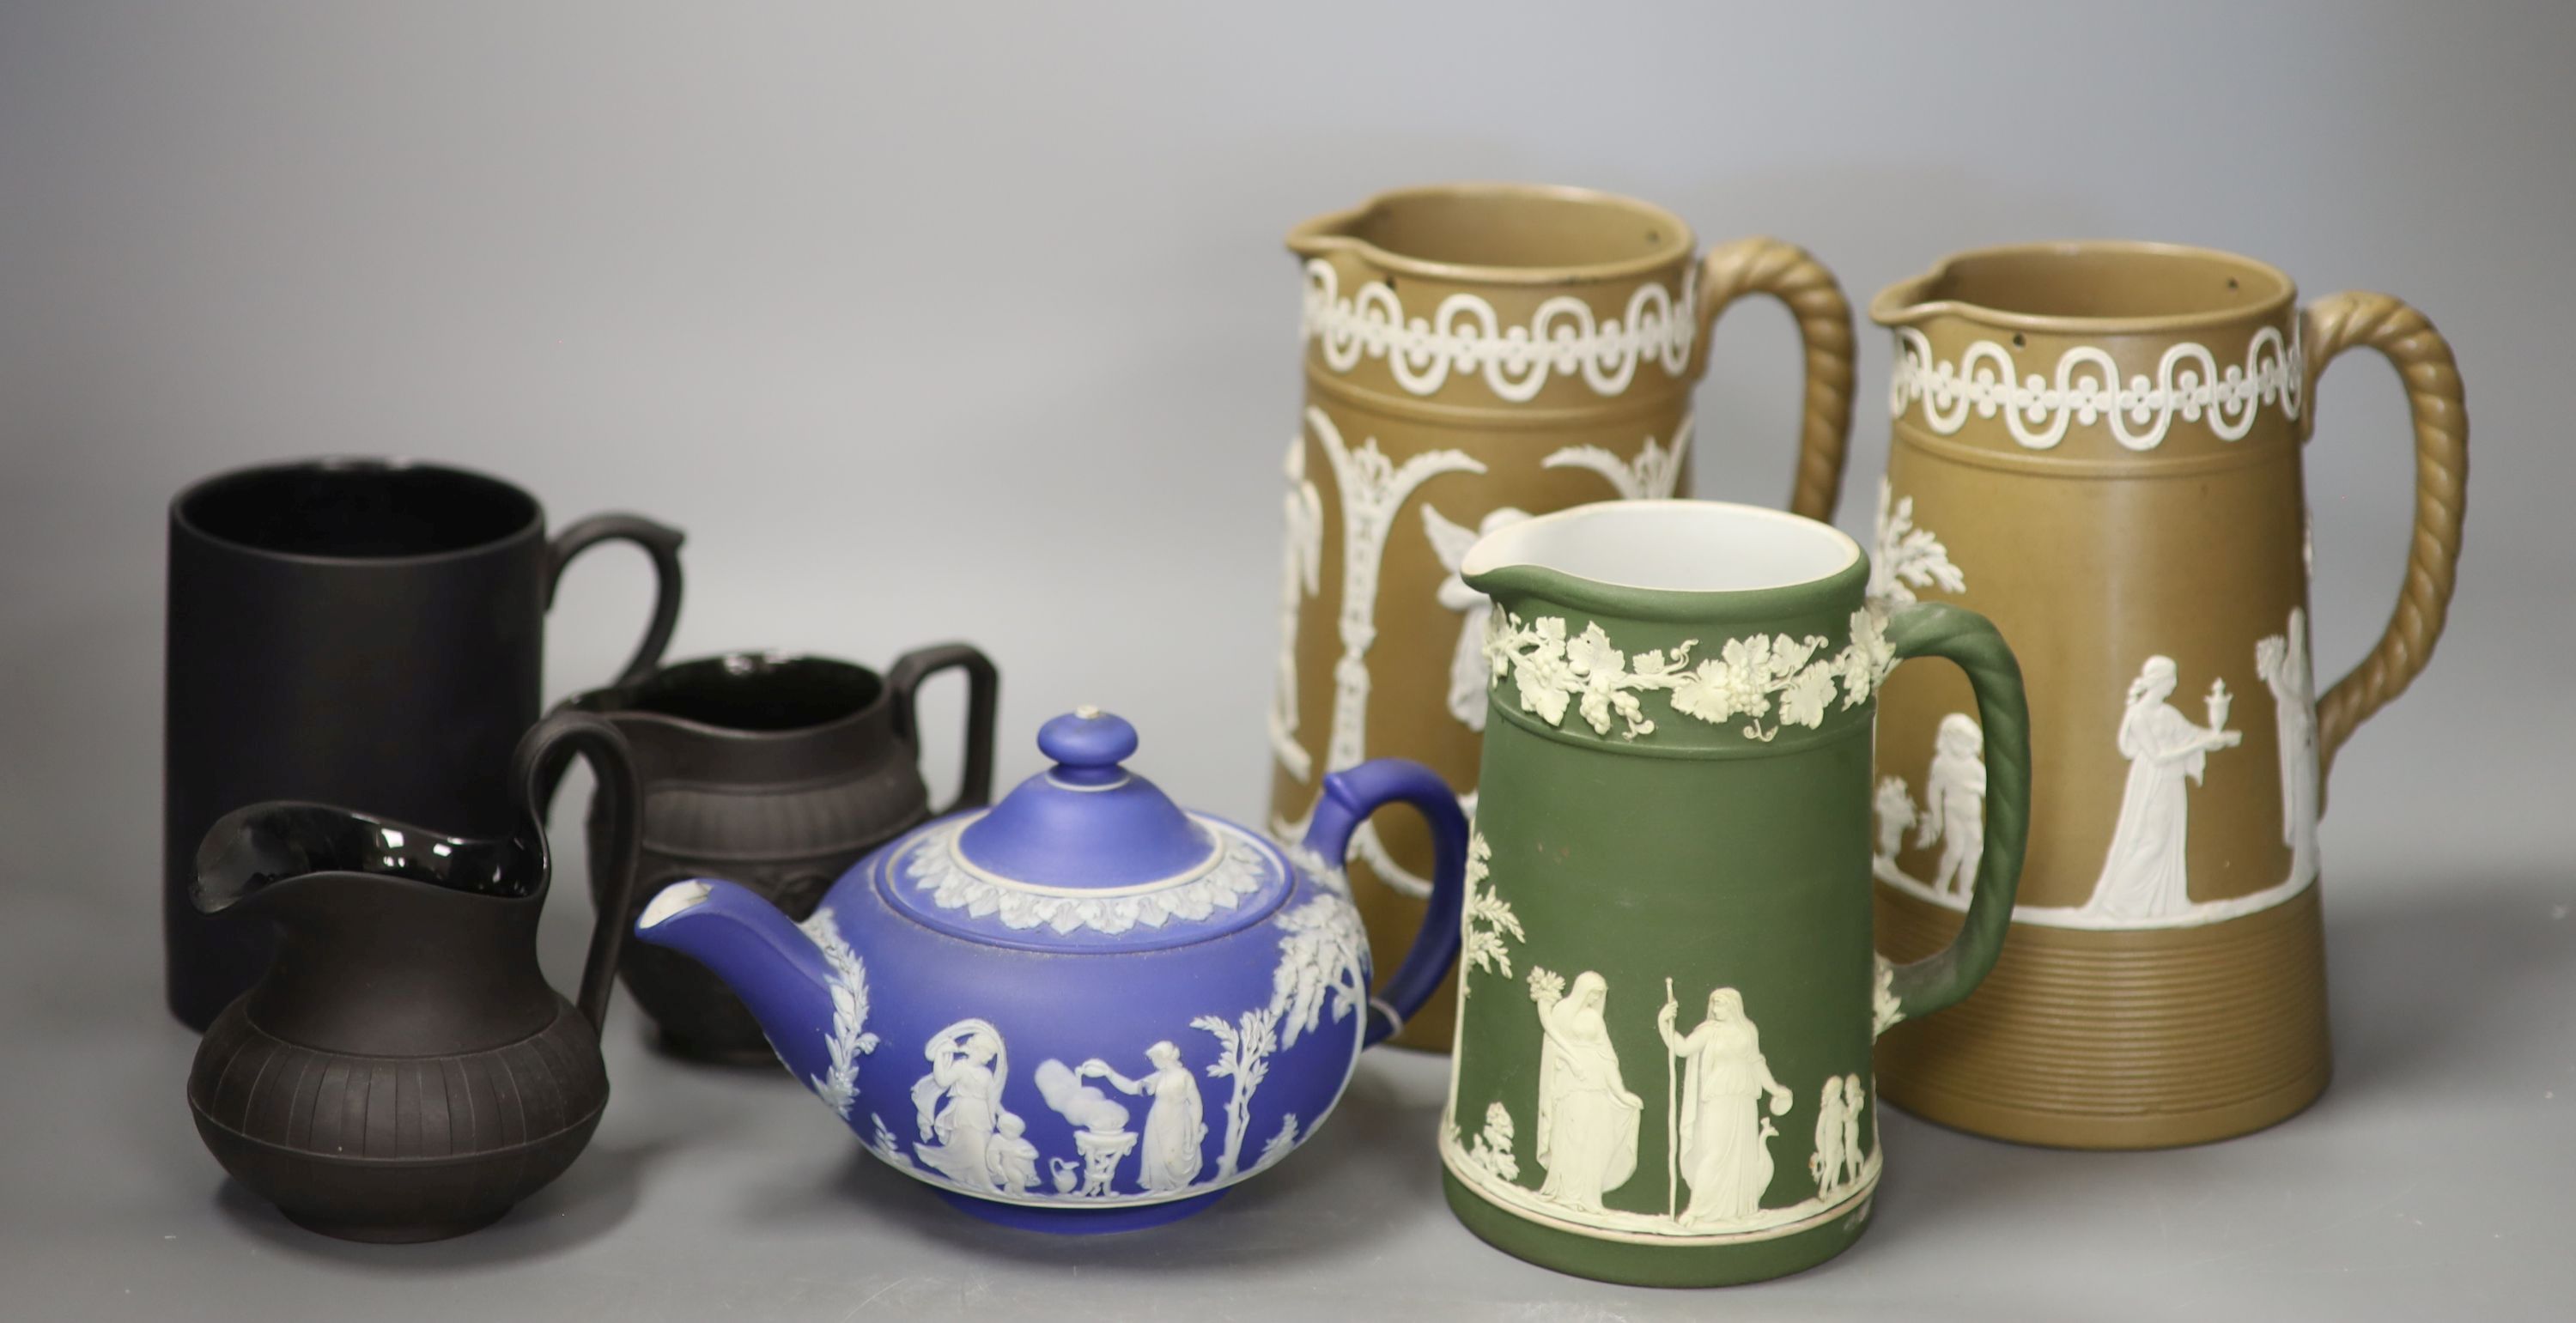 A 19th century Wedgwood teapot and jug, two black basalt jugs and a mug and two drabware jugs, tallest 18cm